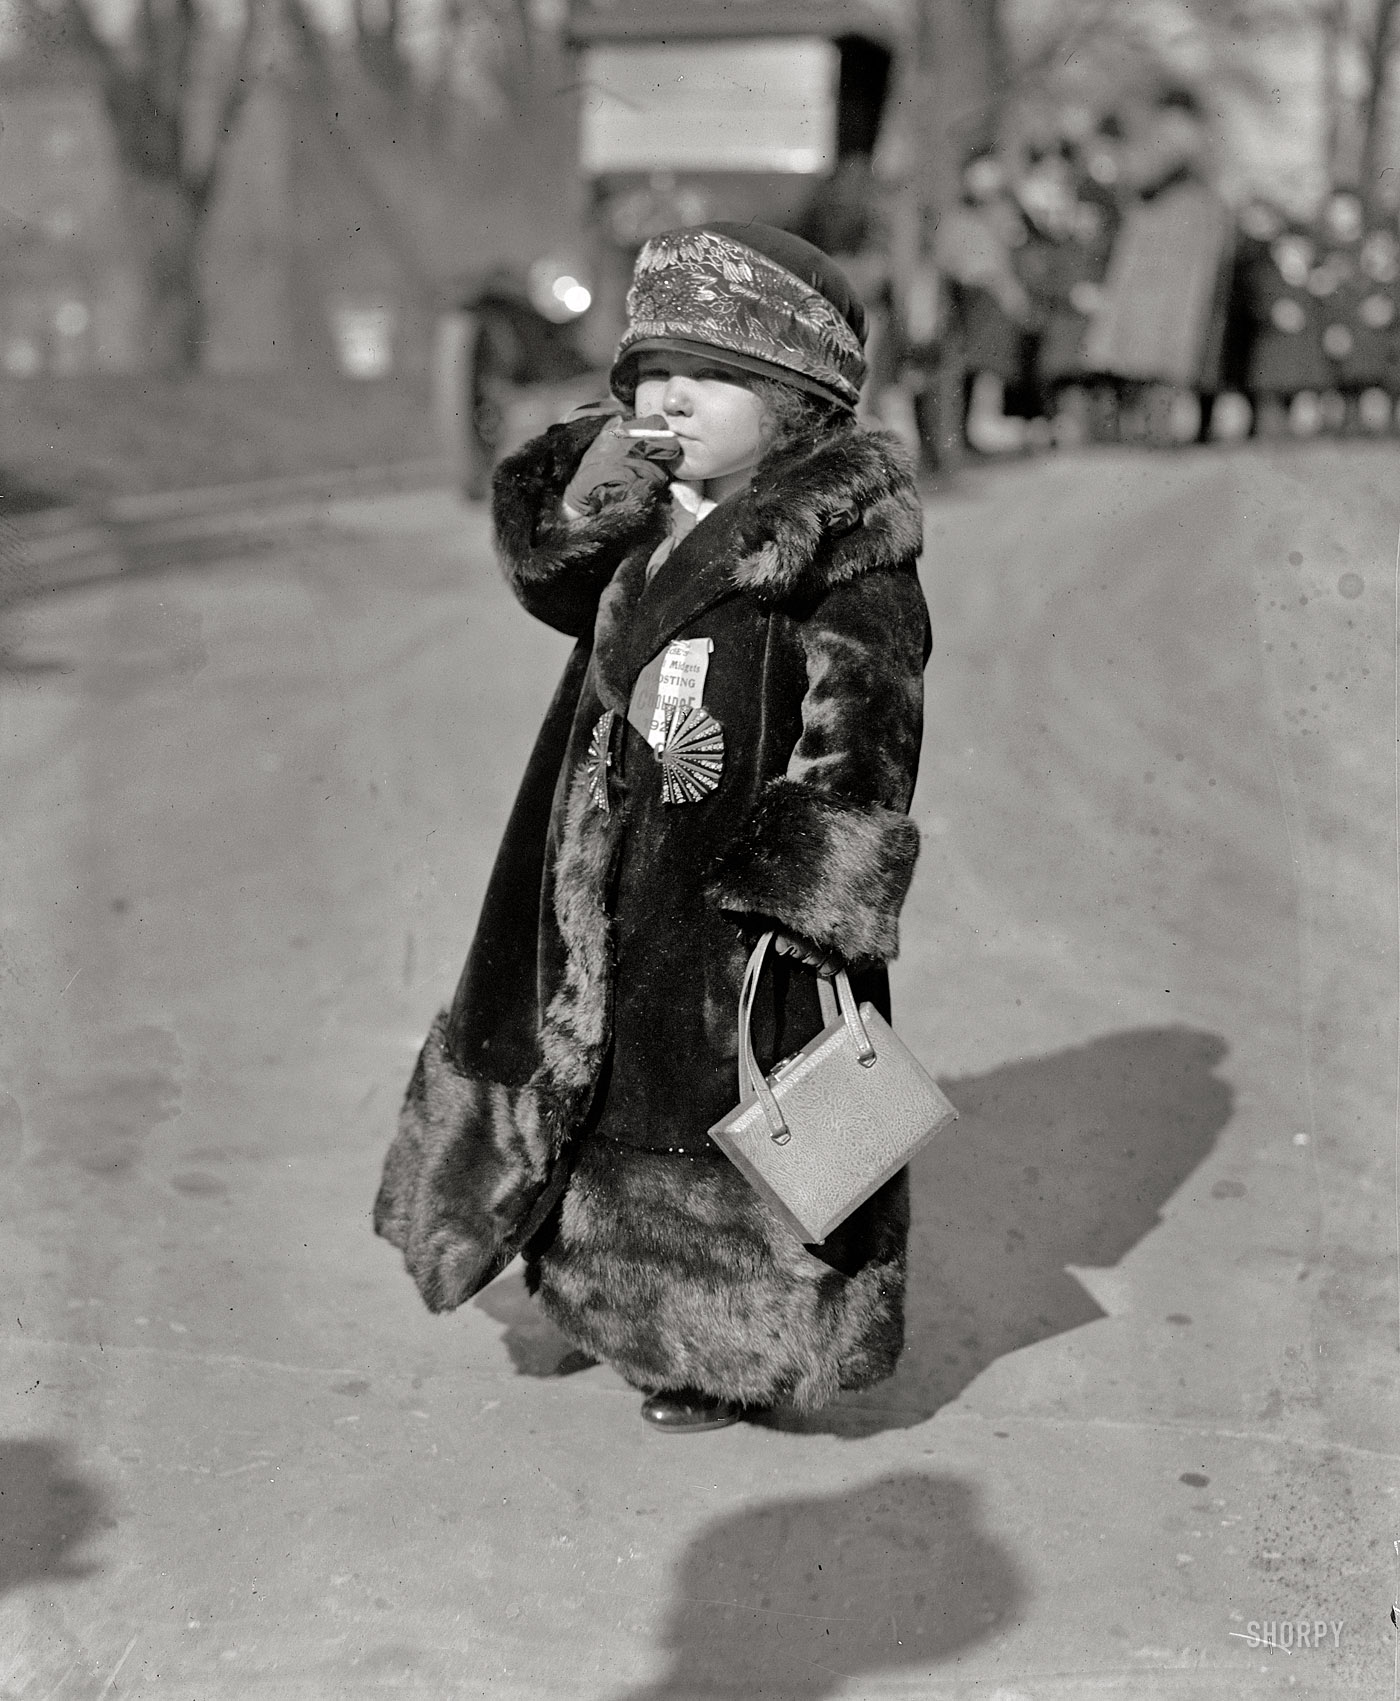 January 23, 1924. Washington, D.C. "Midget." News item, Jan. 20:  "The first organized touring Coolidge Marching Club to work for the nomination of the president comes to Washington Sunday morning. It is composed of 25 European midgets, headed by I.S. Rose, New Englander and impresario. The midgets wear buttons and ribbons on which is inscribed 'Coolidge 1925.'" View full size.